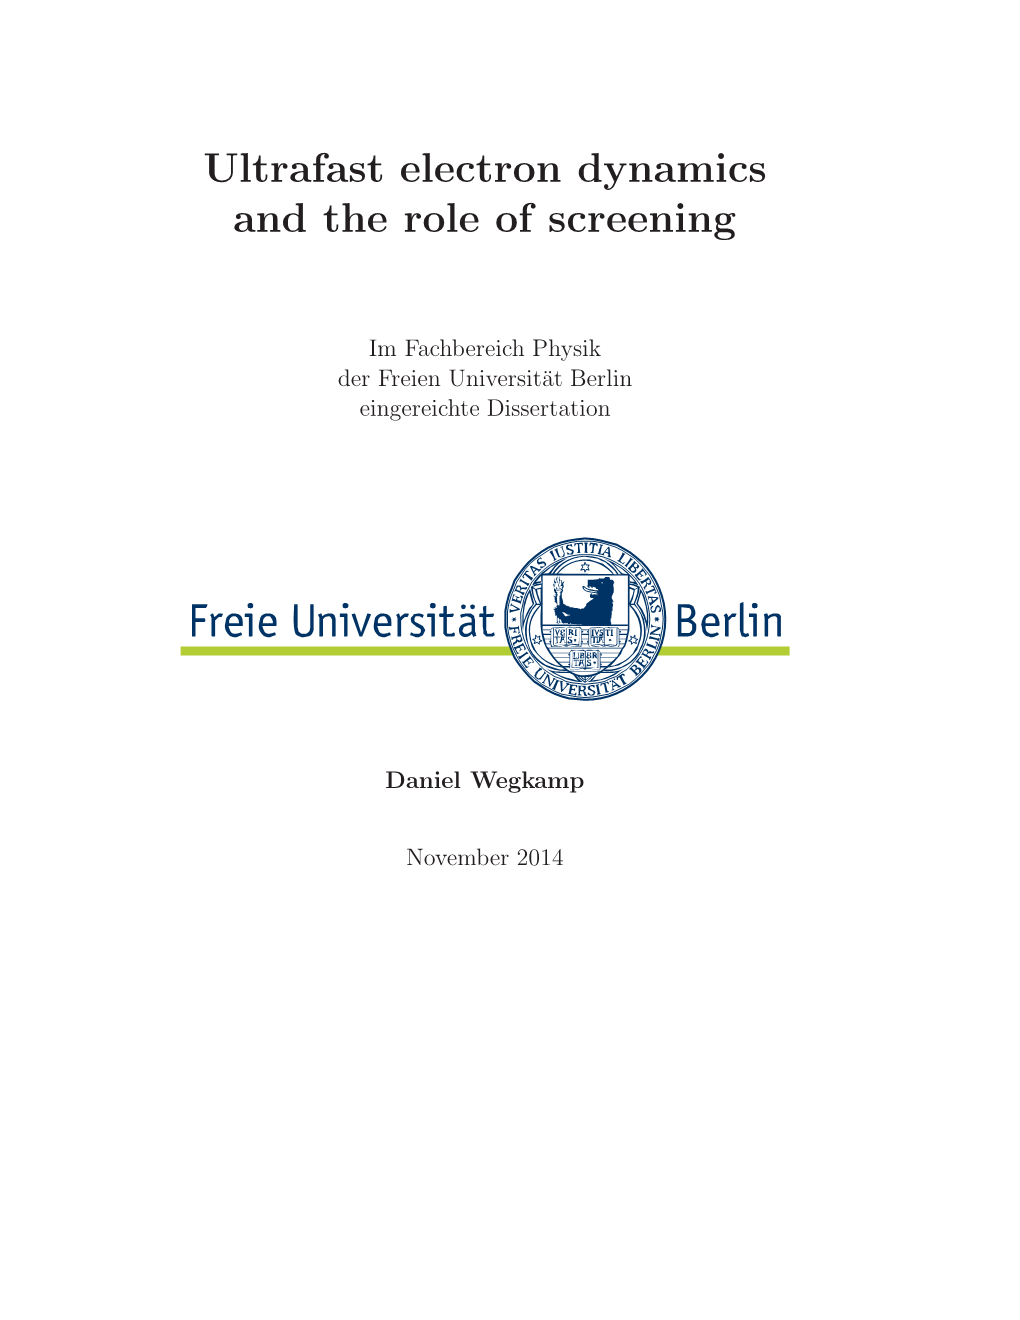 Ultrafast Electron Dynamics and the Role of Screening